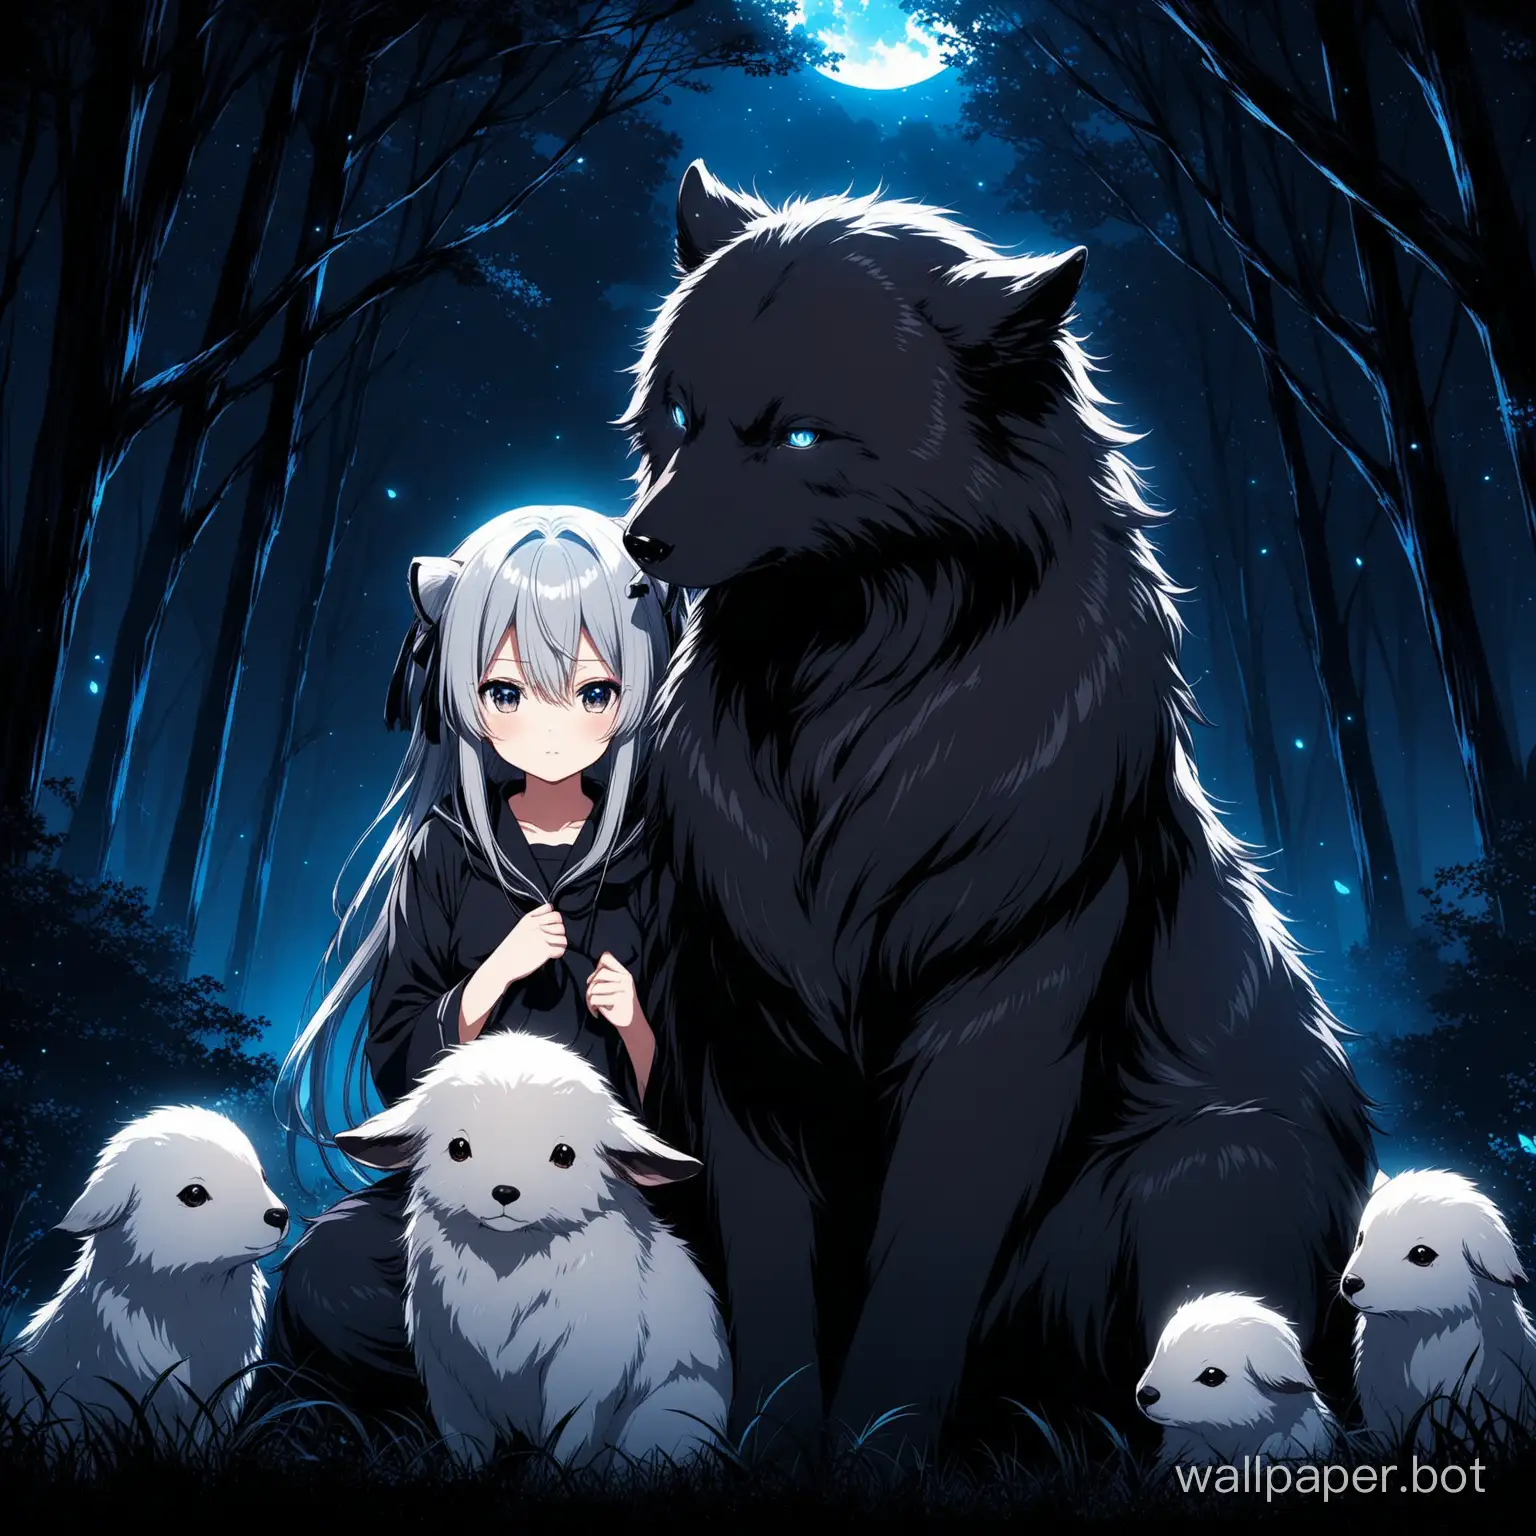 Dark-Anime-Wallpaper-Featuring-Mysterious-Creatures